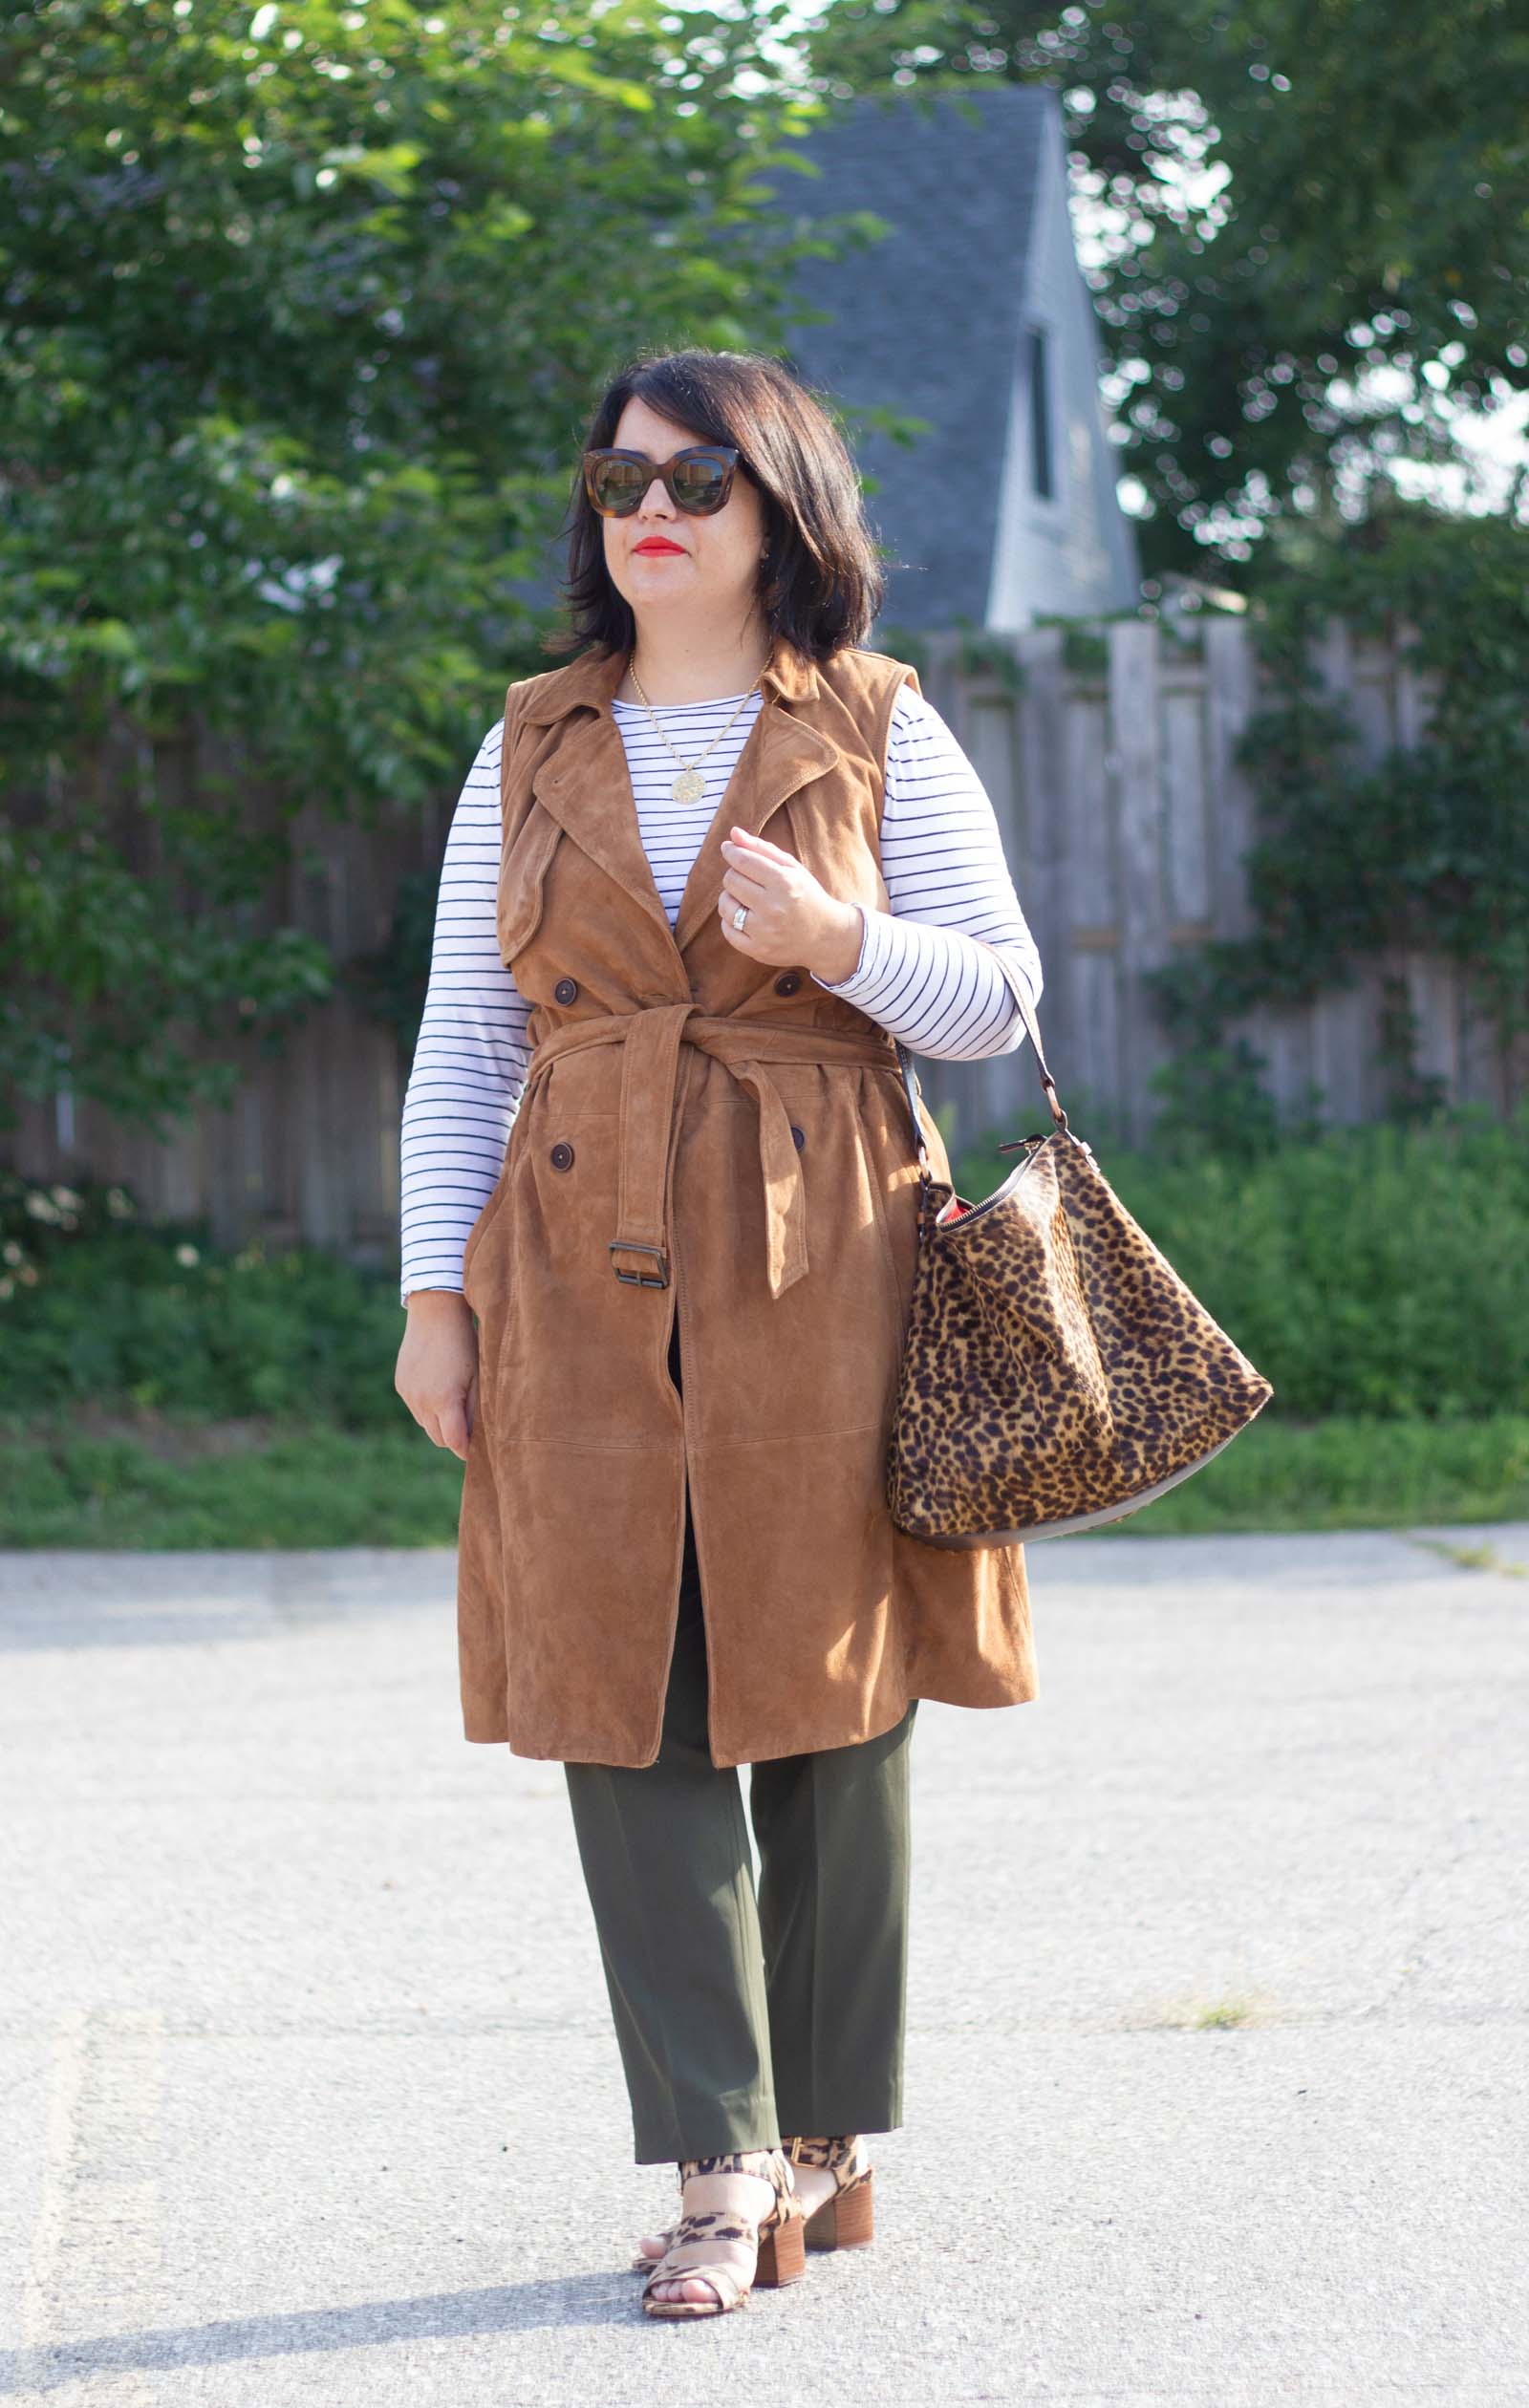 neutral outfit with leopard accents